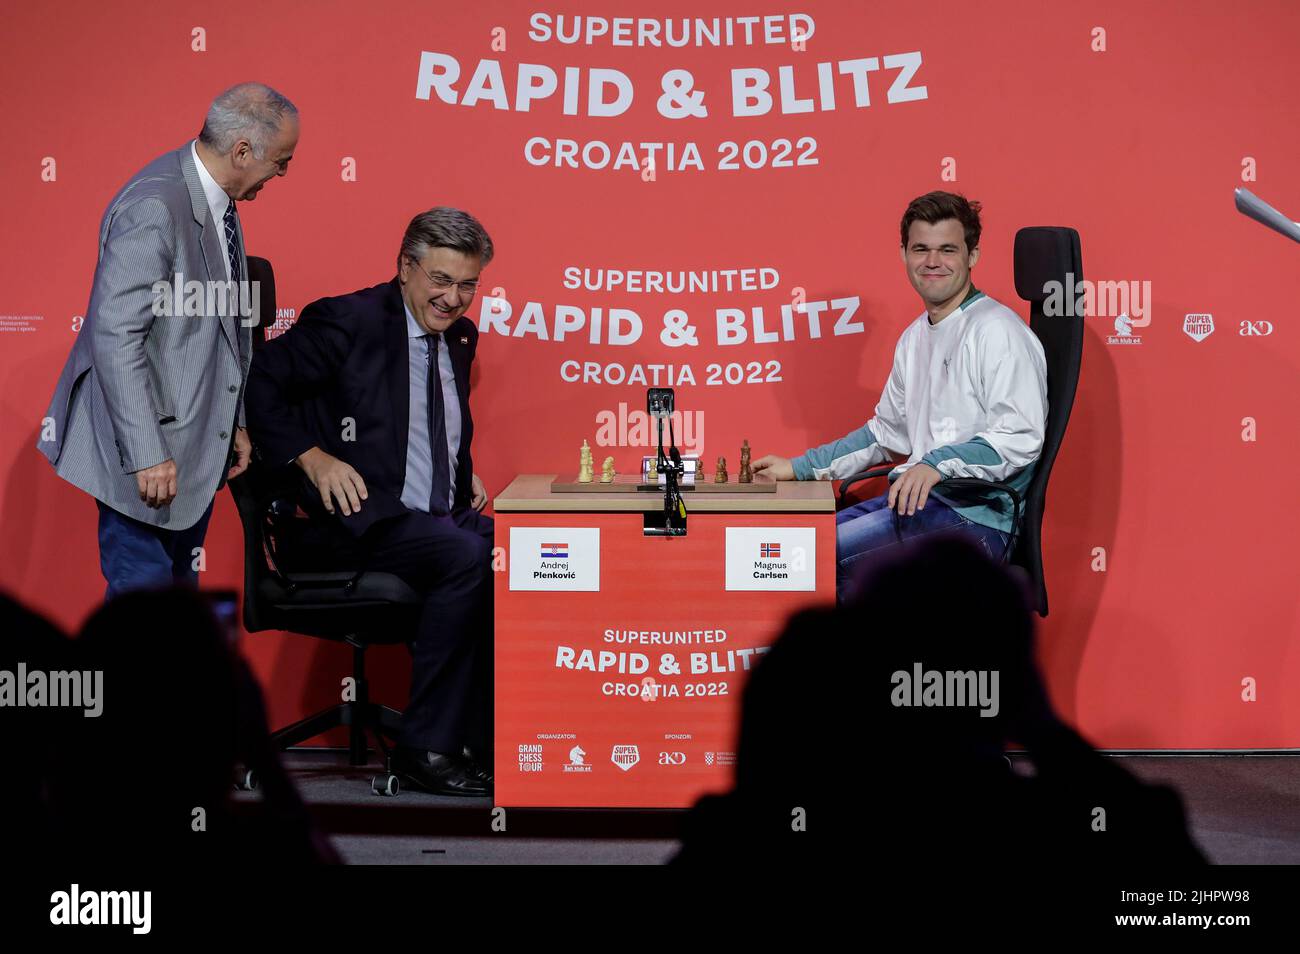 5-time world chess champion Magnus Carlsen says he will not defend his  title - OPB